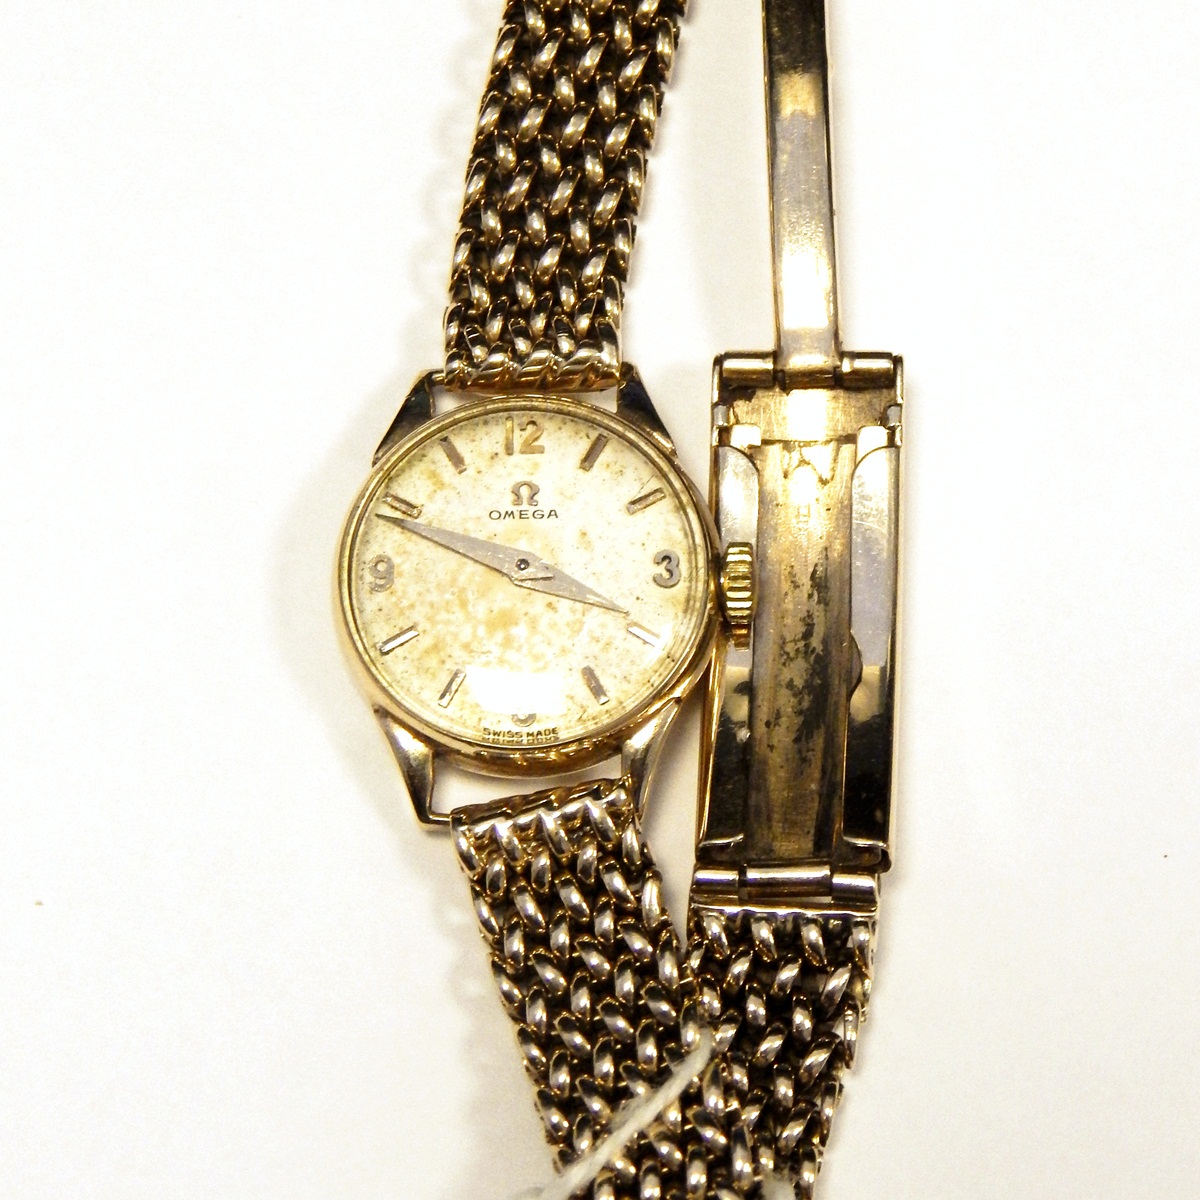 Lady's Omega 9ct gold dress watch with silvered dial and link chain expanding bracelet